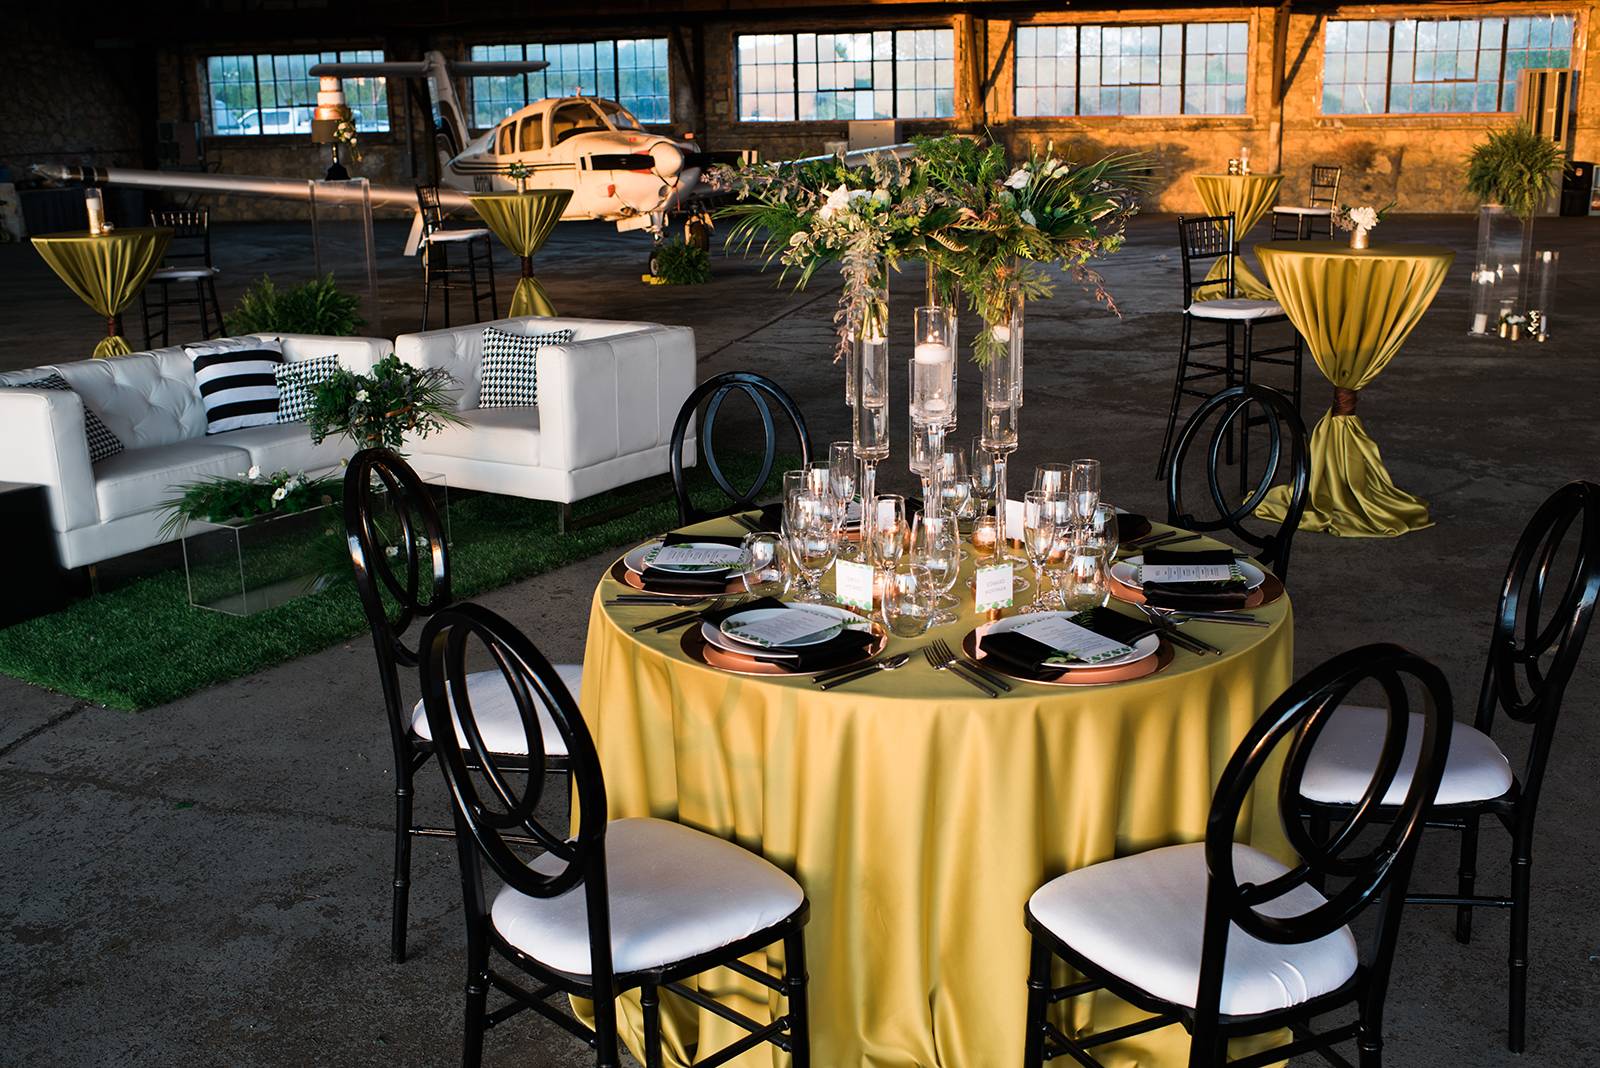 wedding reception design, green table linens, tall floral centerpieces, black specialty chair rental